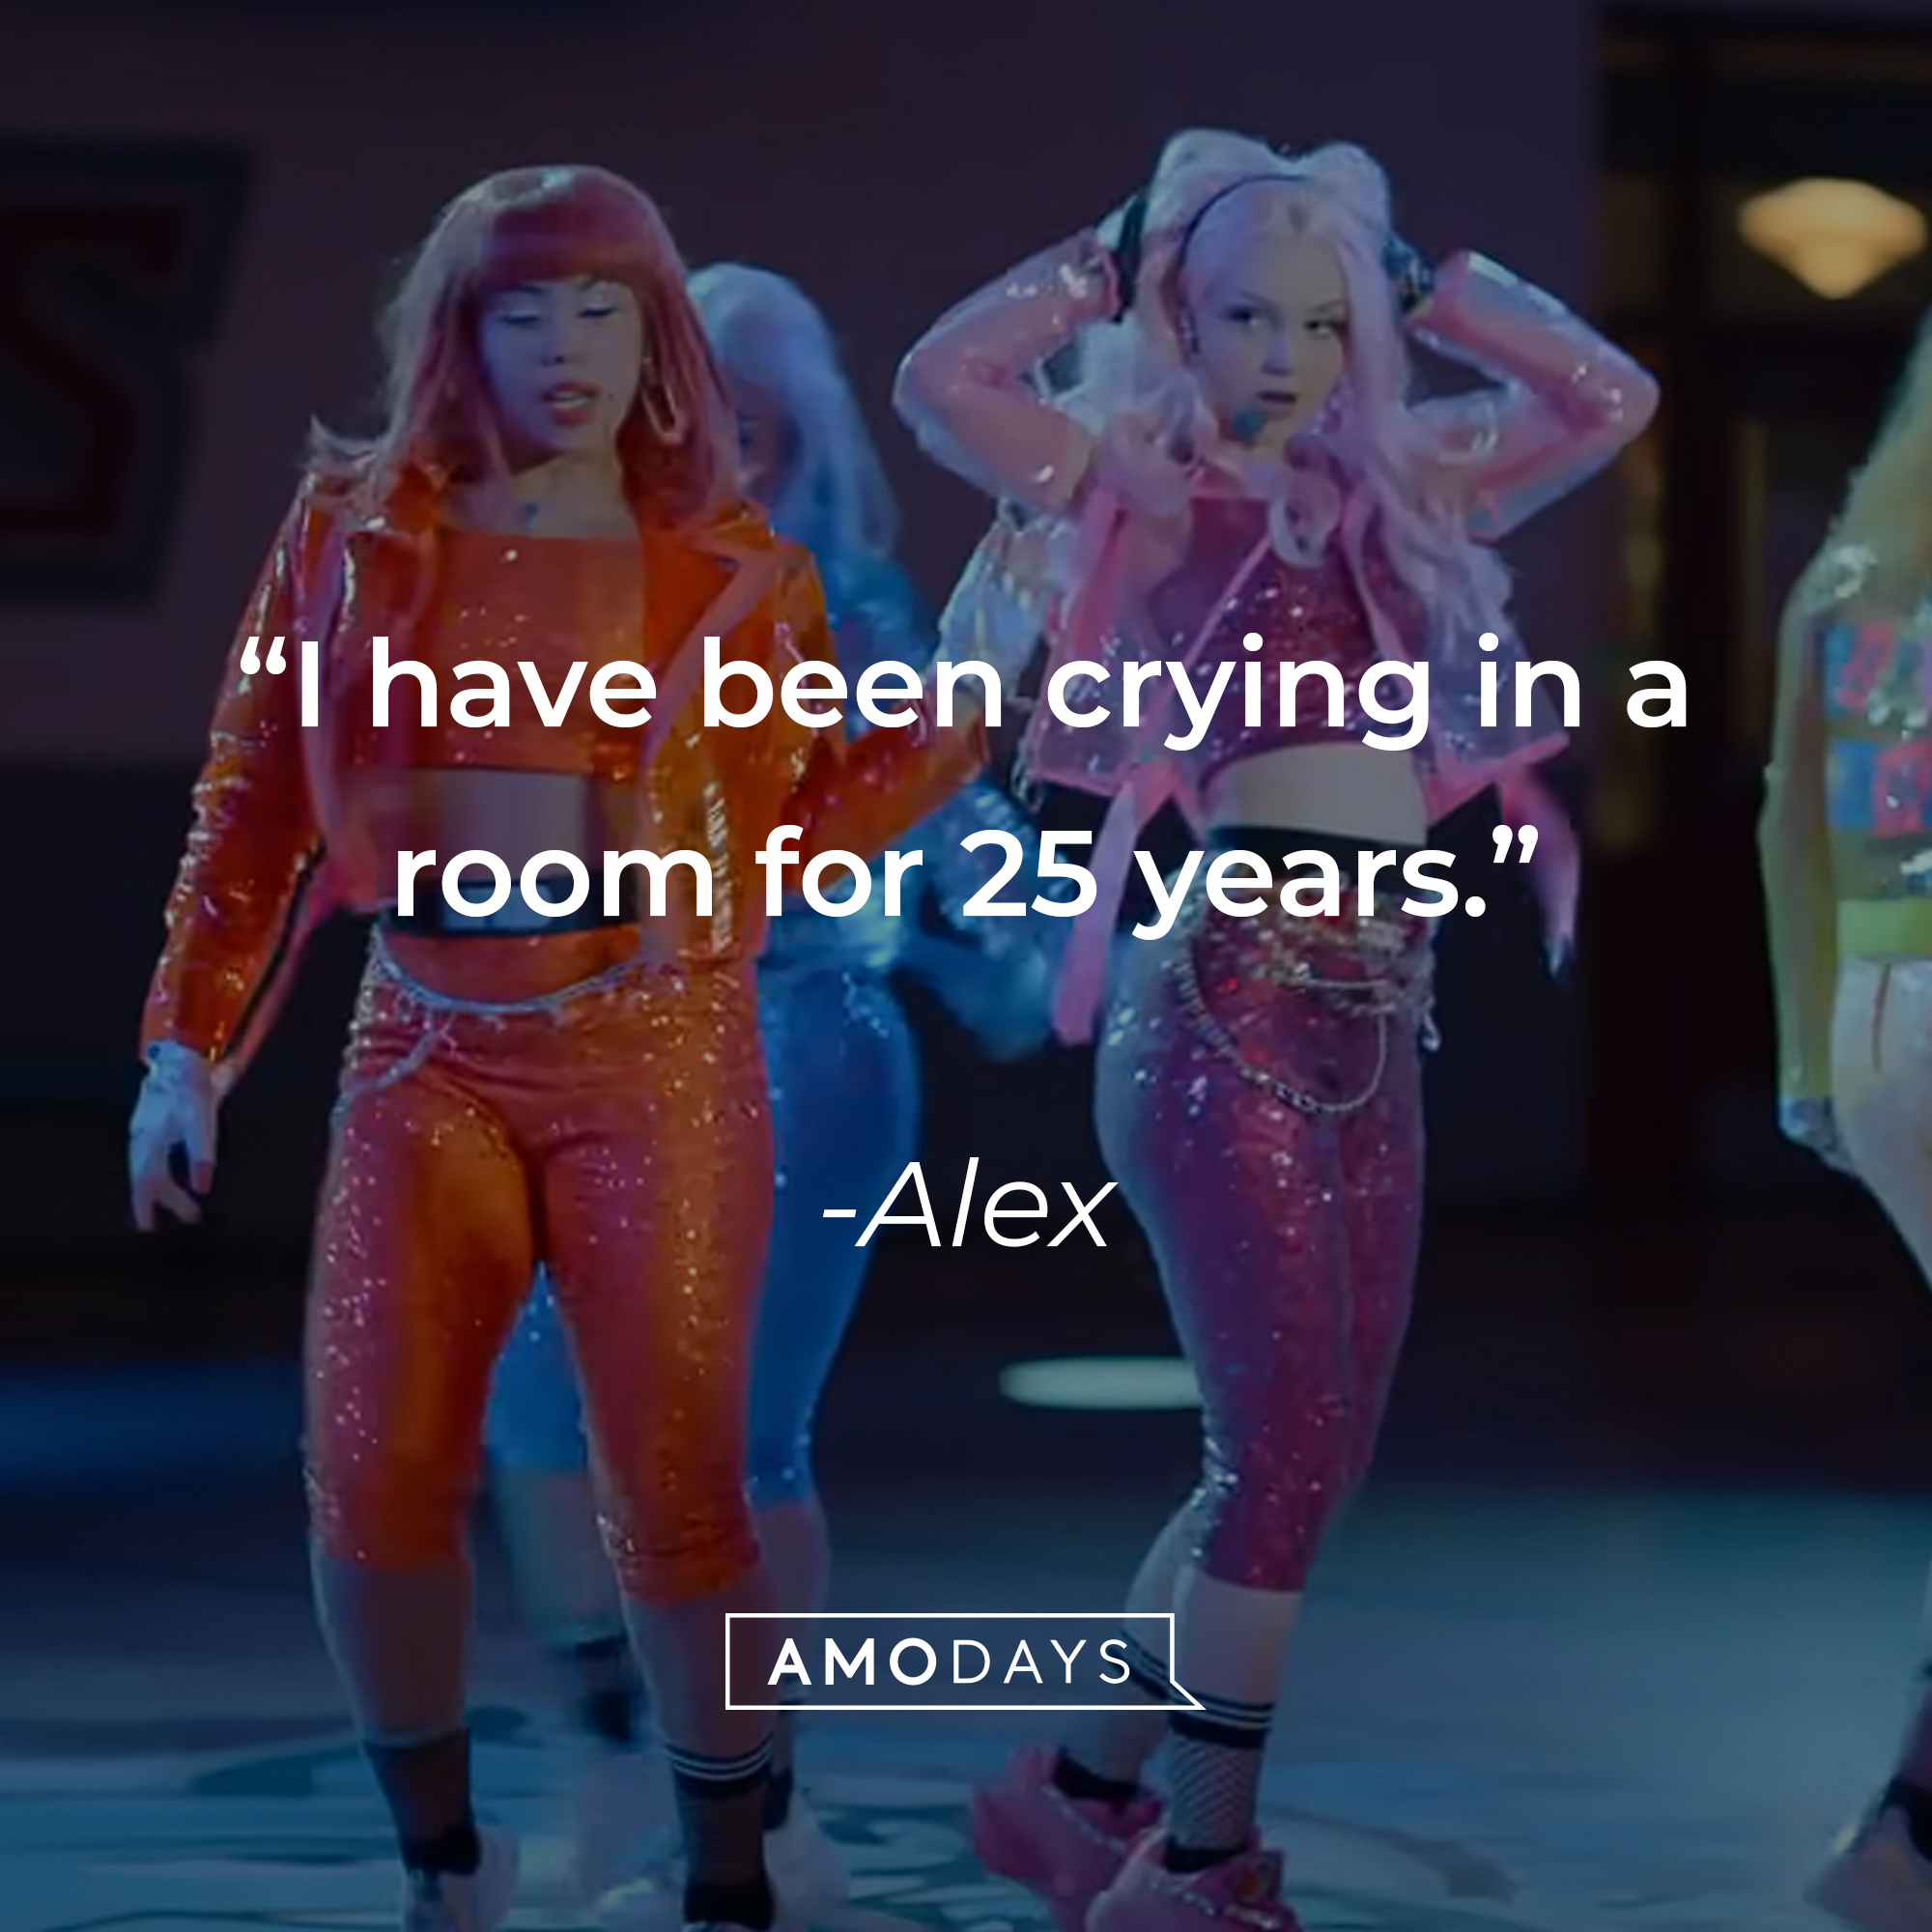 An image of characters from “Julia and the Phantoms” band with Alex’s quote: “I have been crying in a room for 25 years.” | Source: youtube.com/netflixafterschool